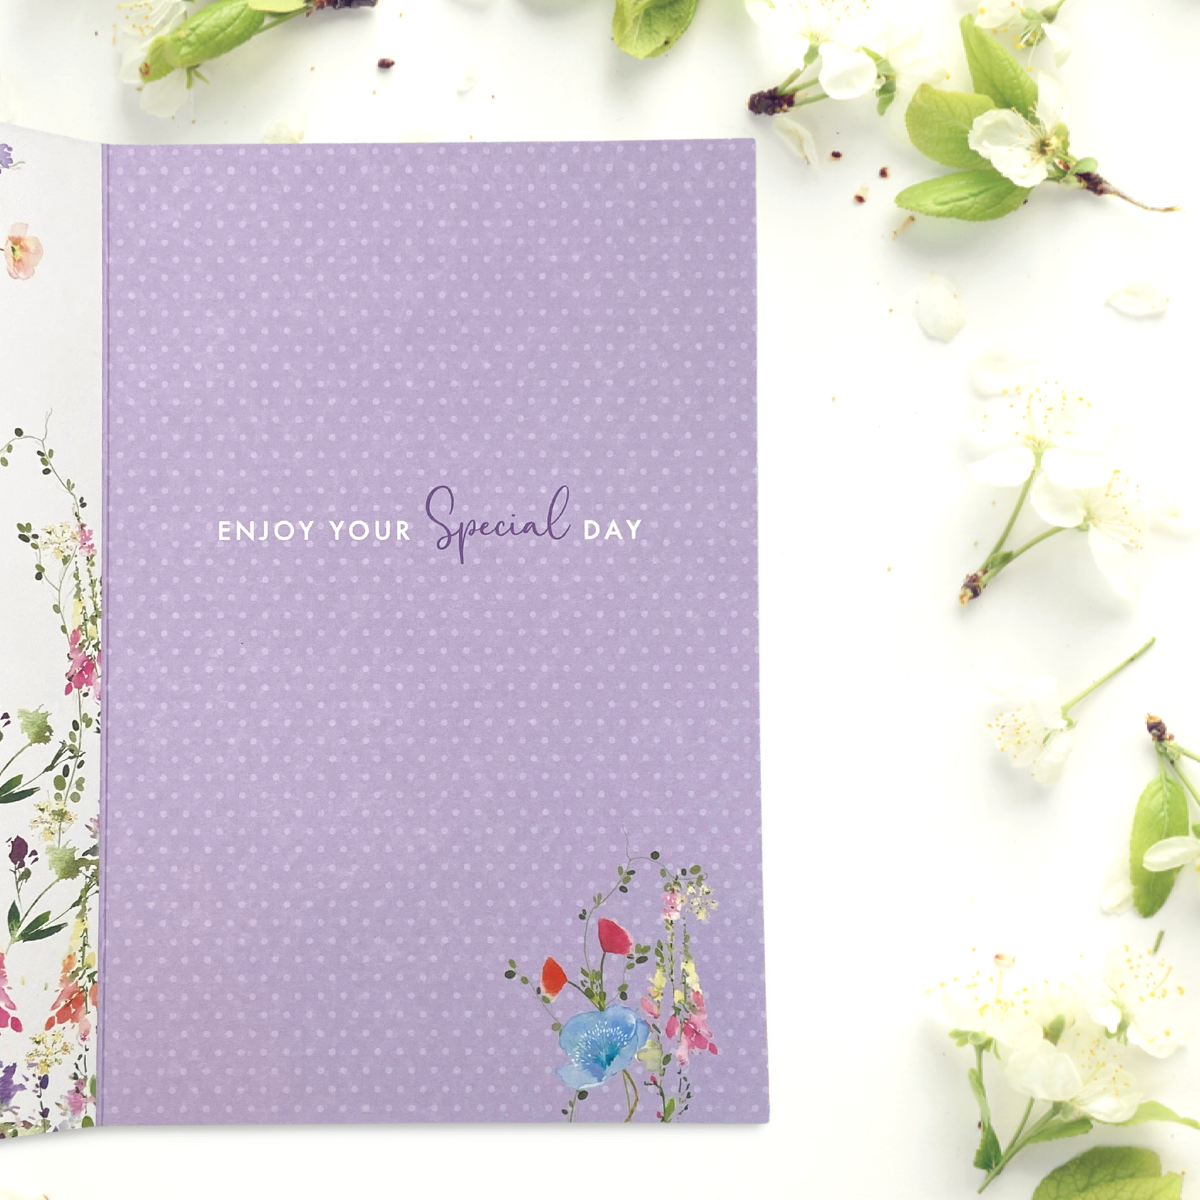 Inside image with purple background and flower details and verse